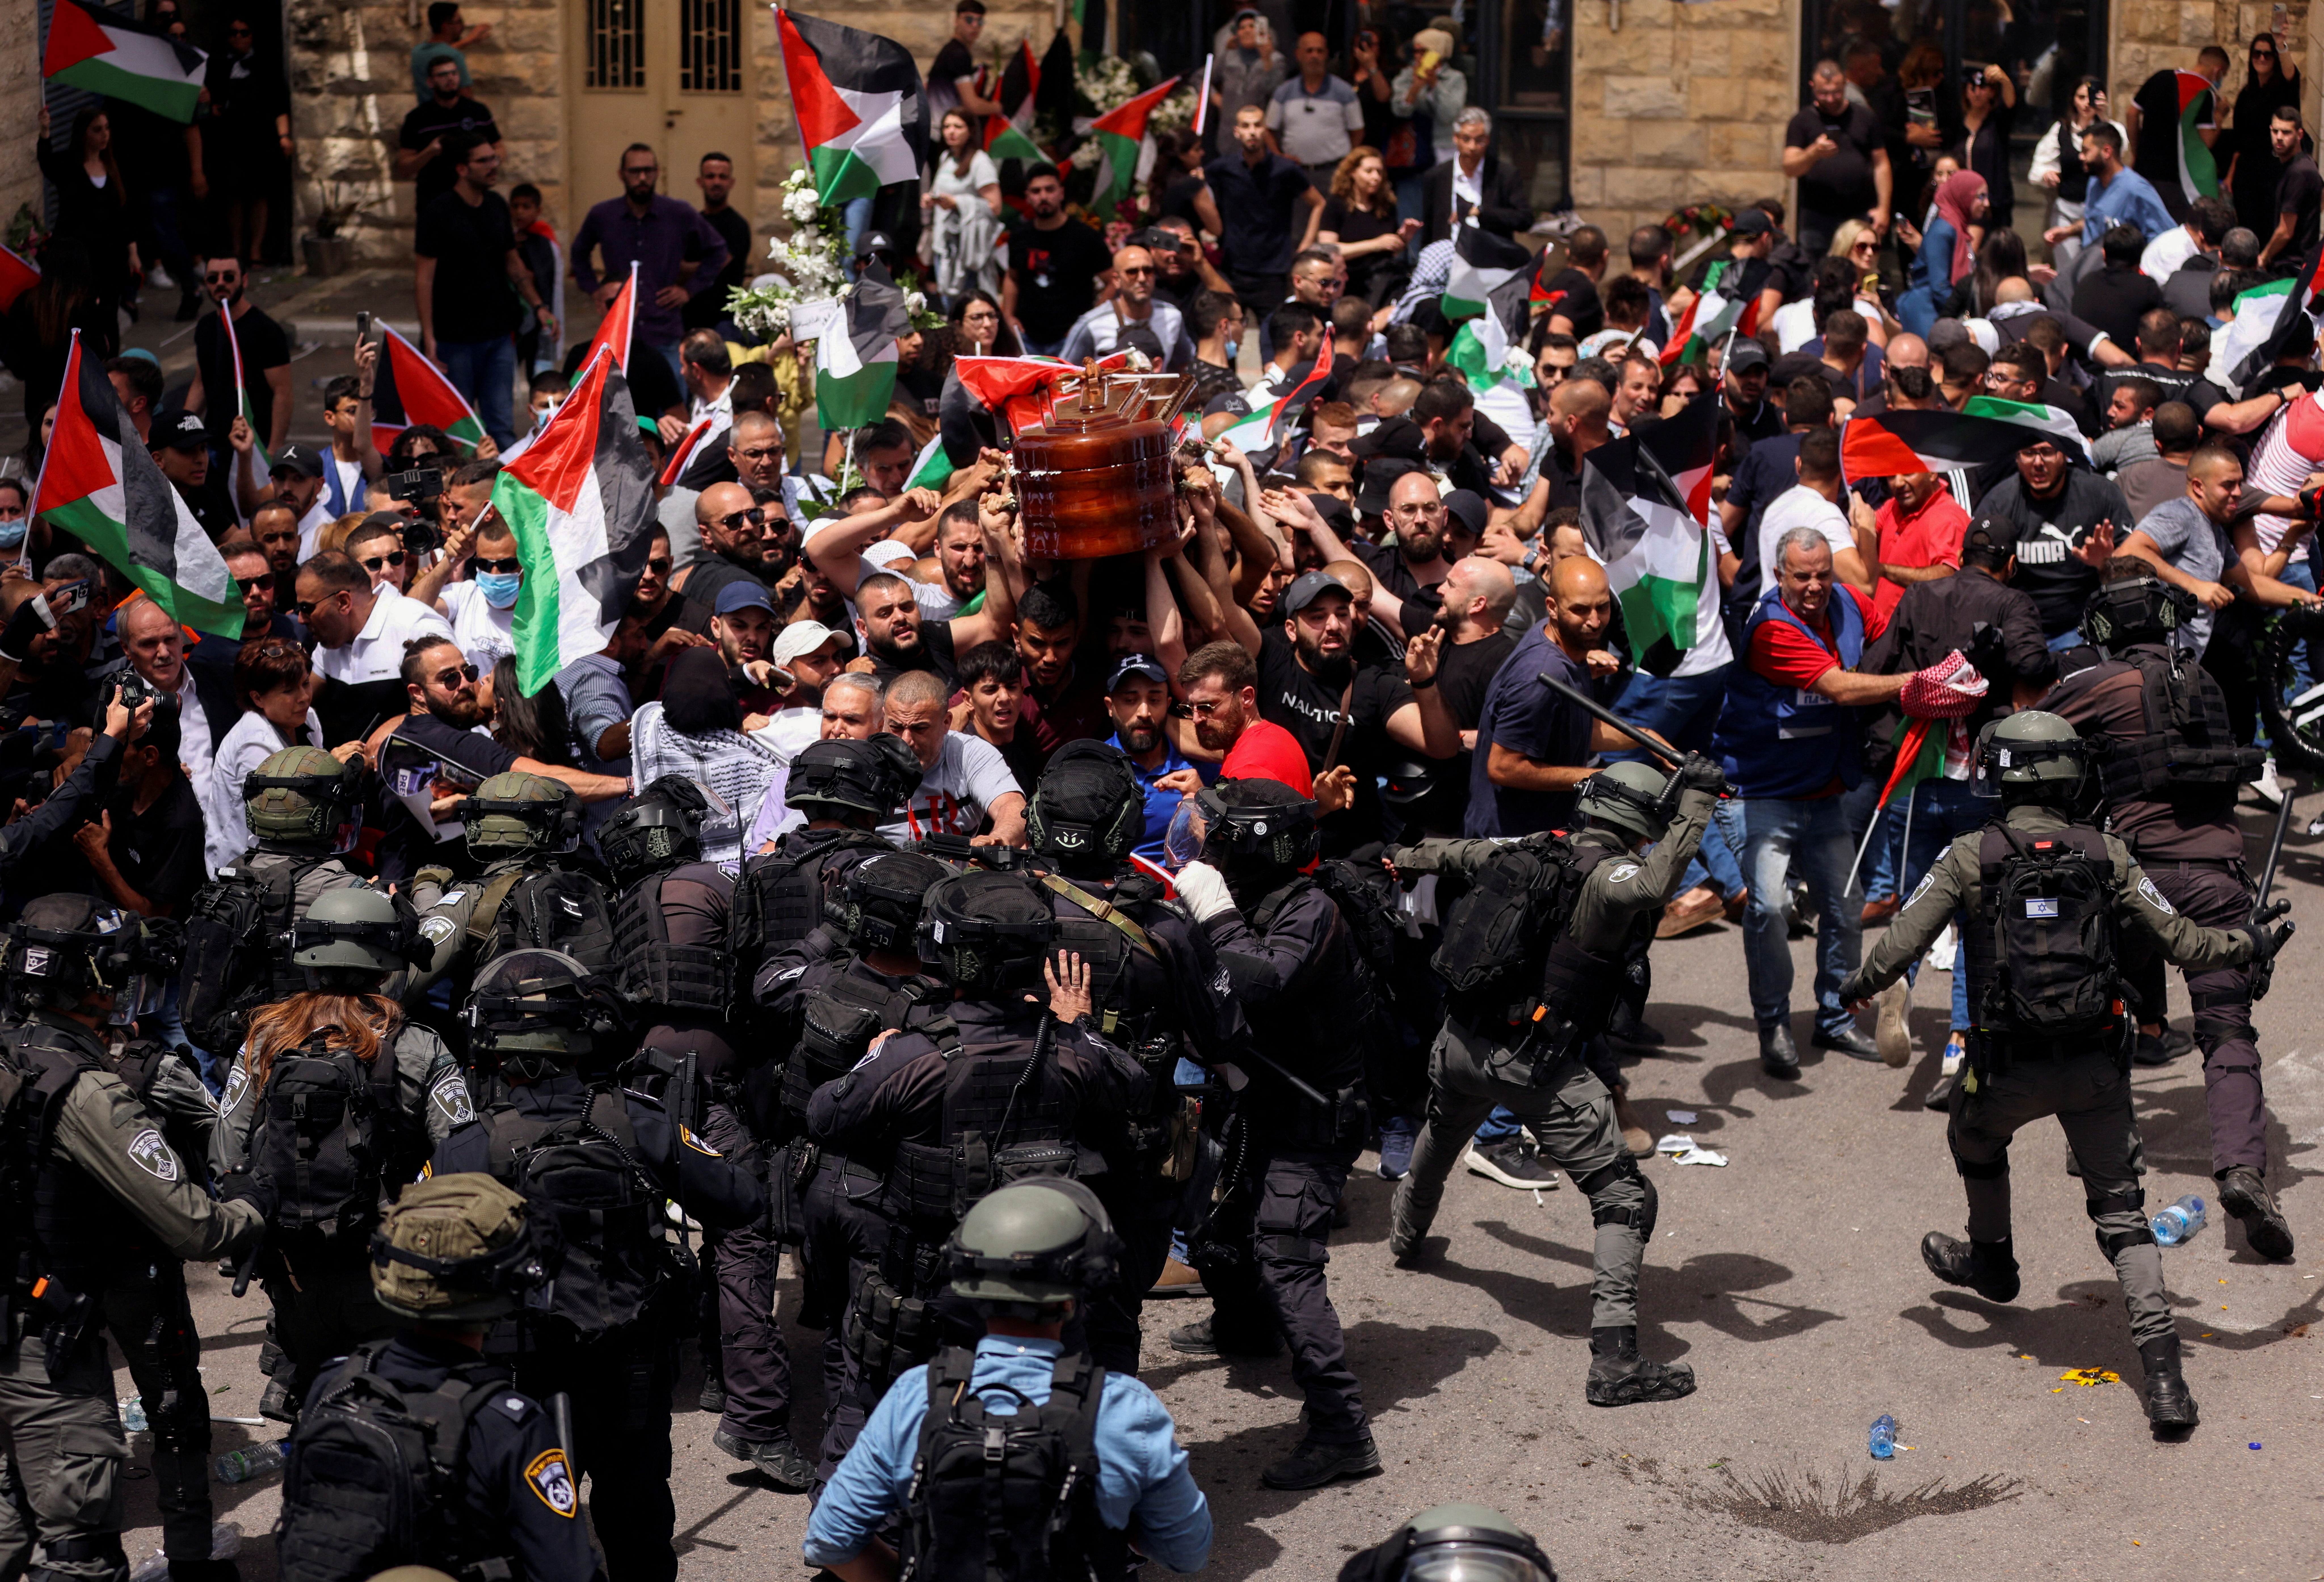 Family and friends carry the coffin of Al Jazeera reporter Shireen Abu Akleh during her funeral in Jerusalem